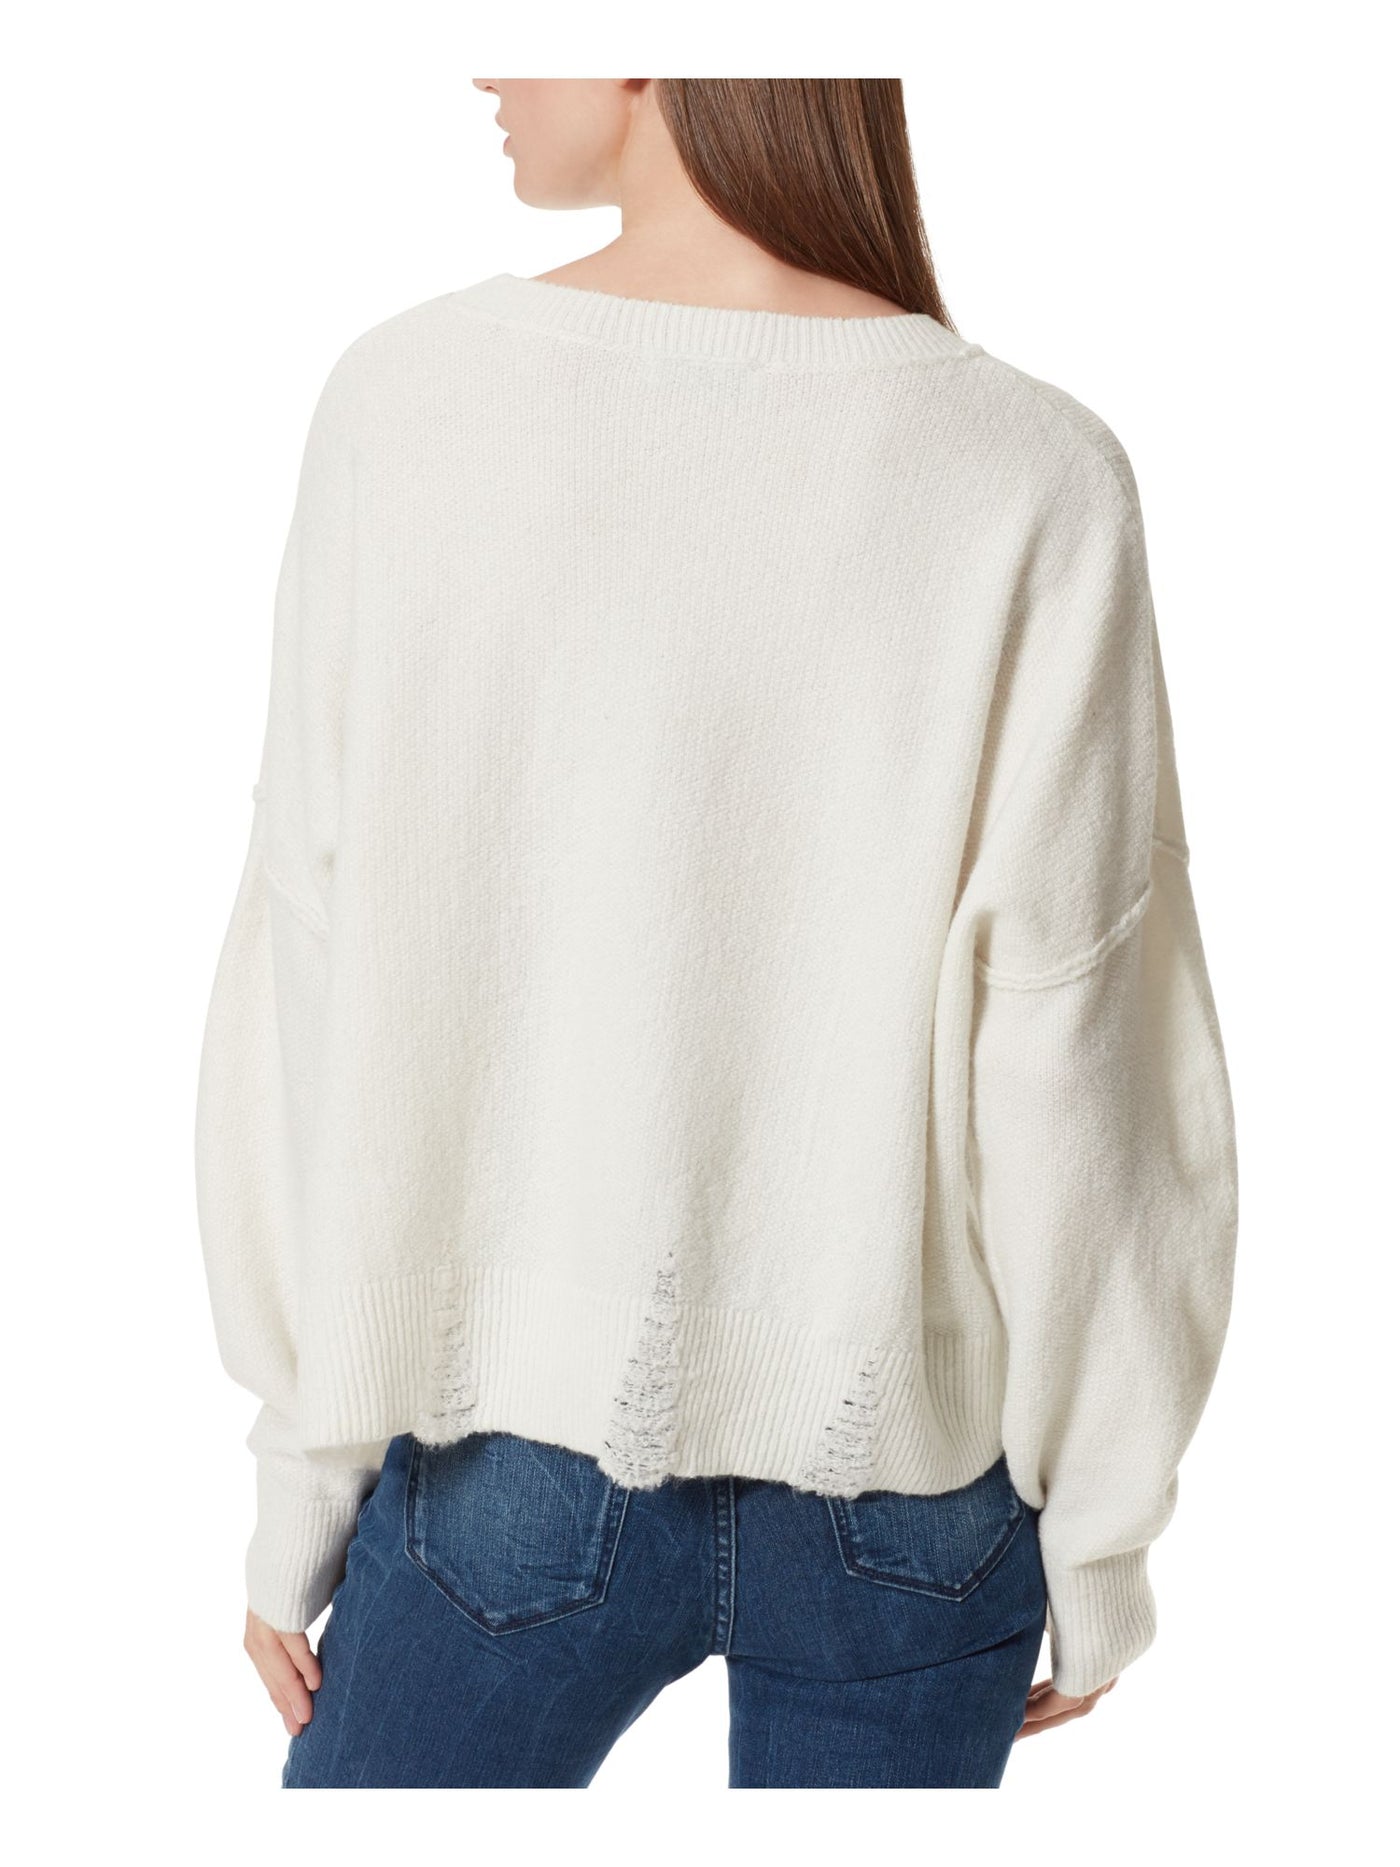 FRAYED Womens White Distressed Frayed Sheer Ribbed Long Sleeve Crew Neck Sweater L